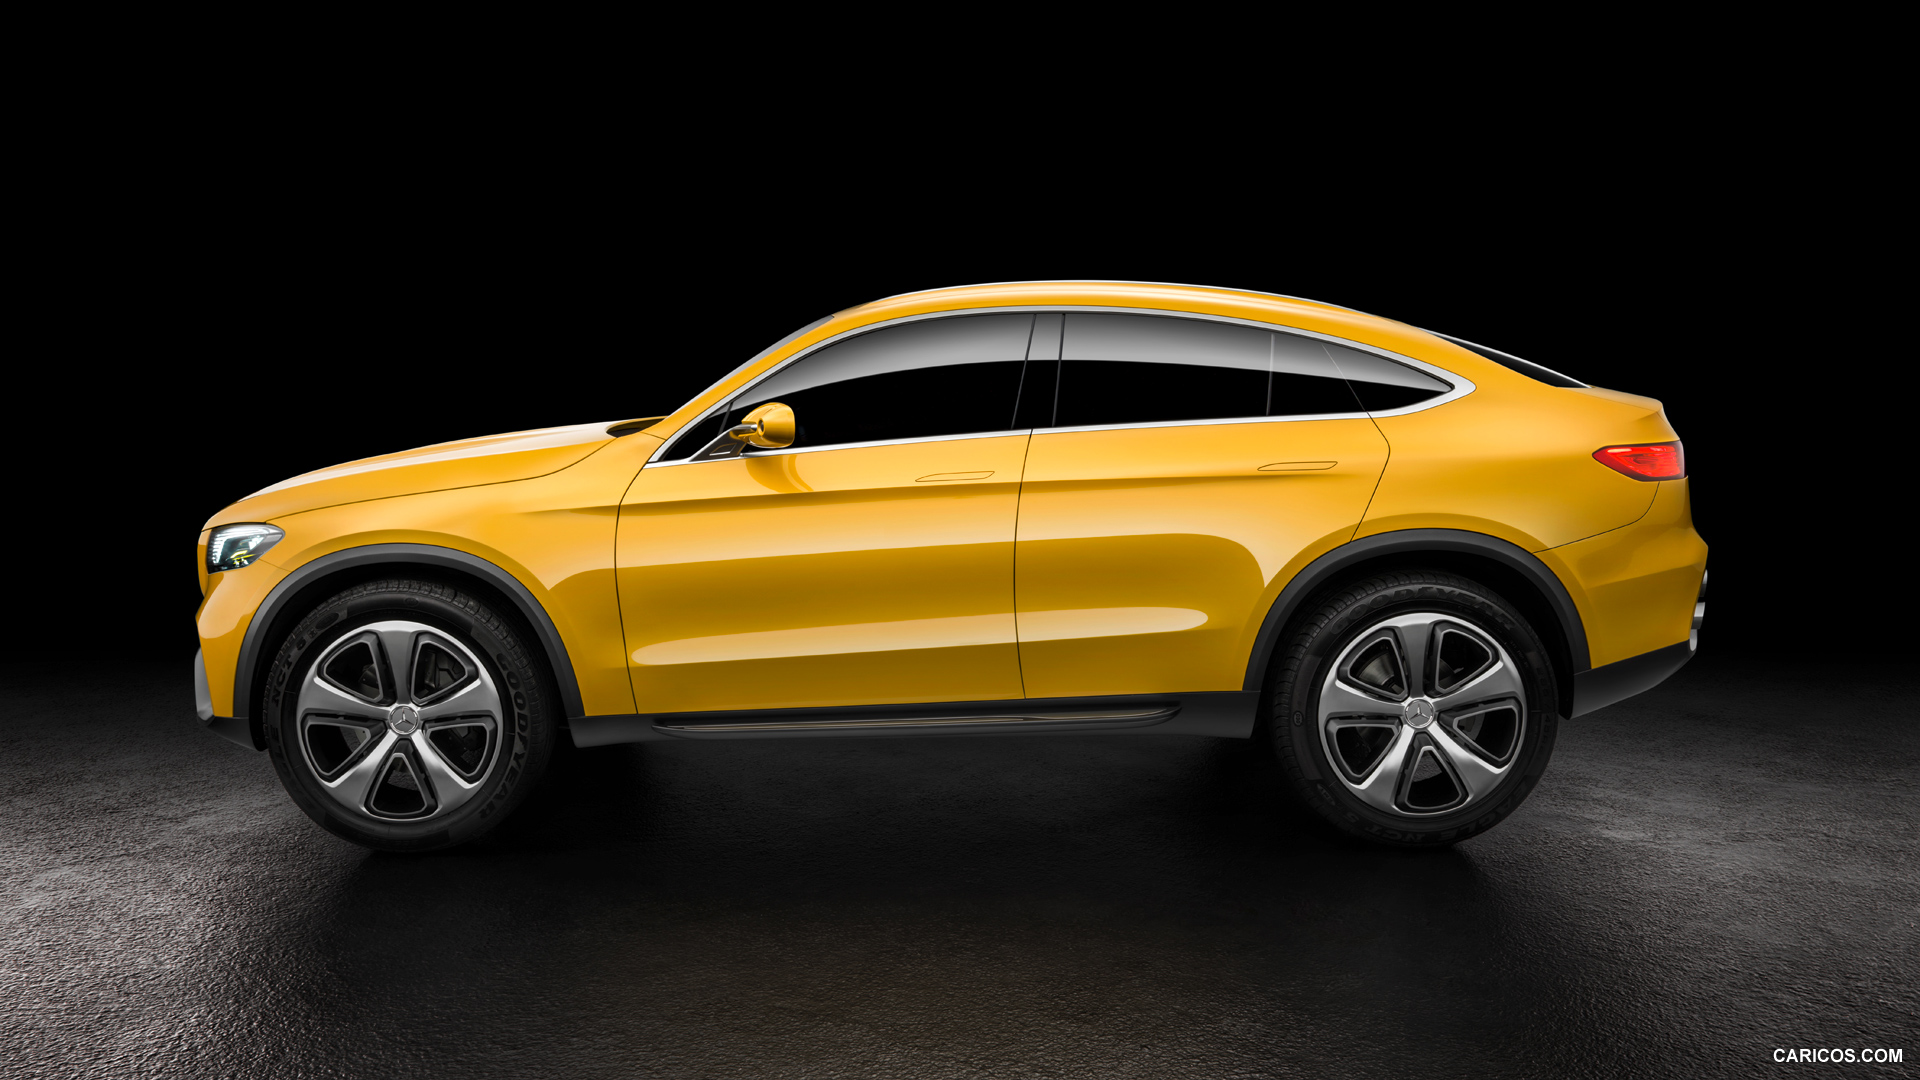 2015 Mercedes-Benz GLC Coupe Concept  - Side, #11 of 16